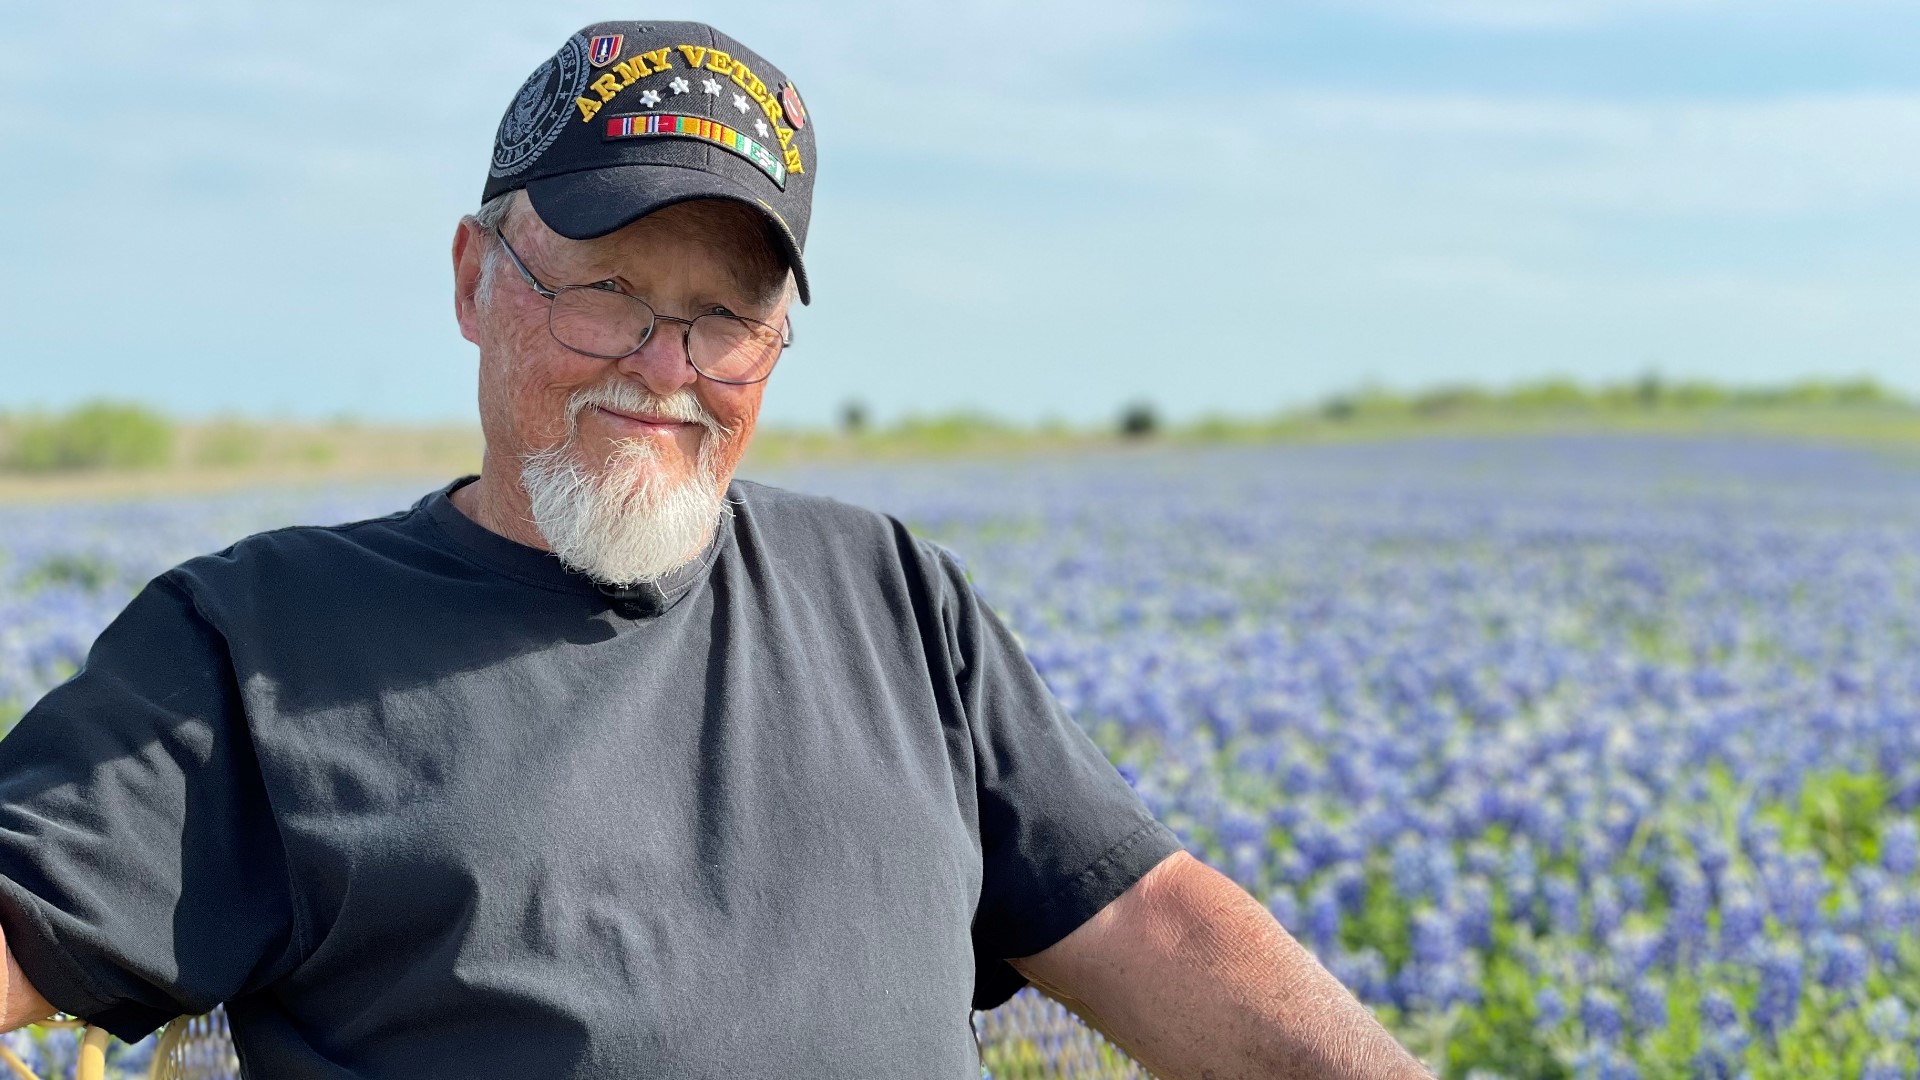 Joe Dolezalik's farm in Ennis has 35 flush acres of bluebonnets. It's been a popular spot for photos this year, and the visits bring new meaning to the Vietnam vet.